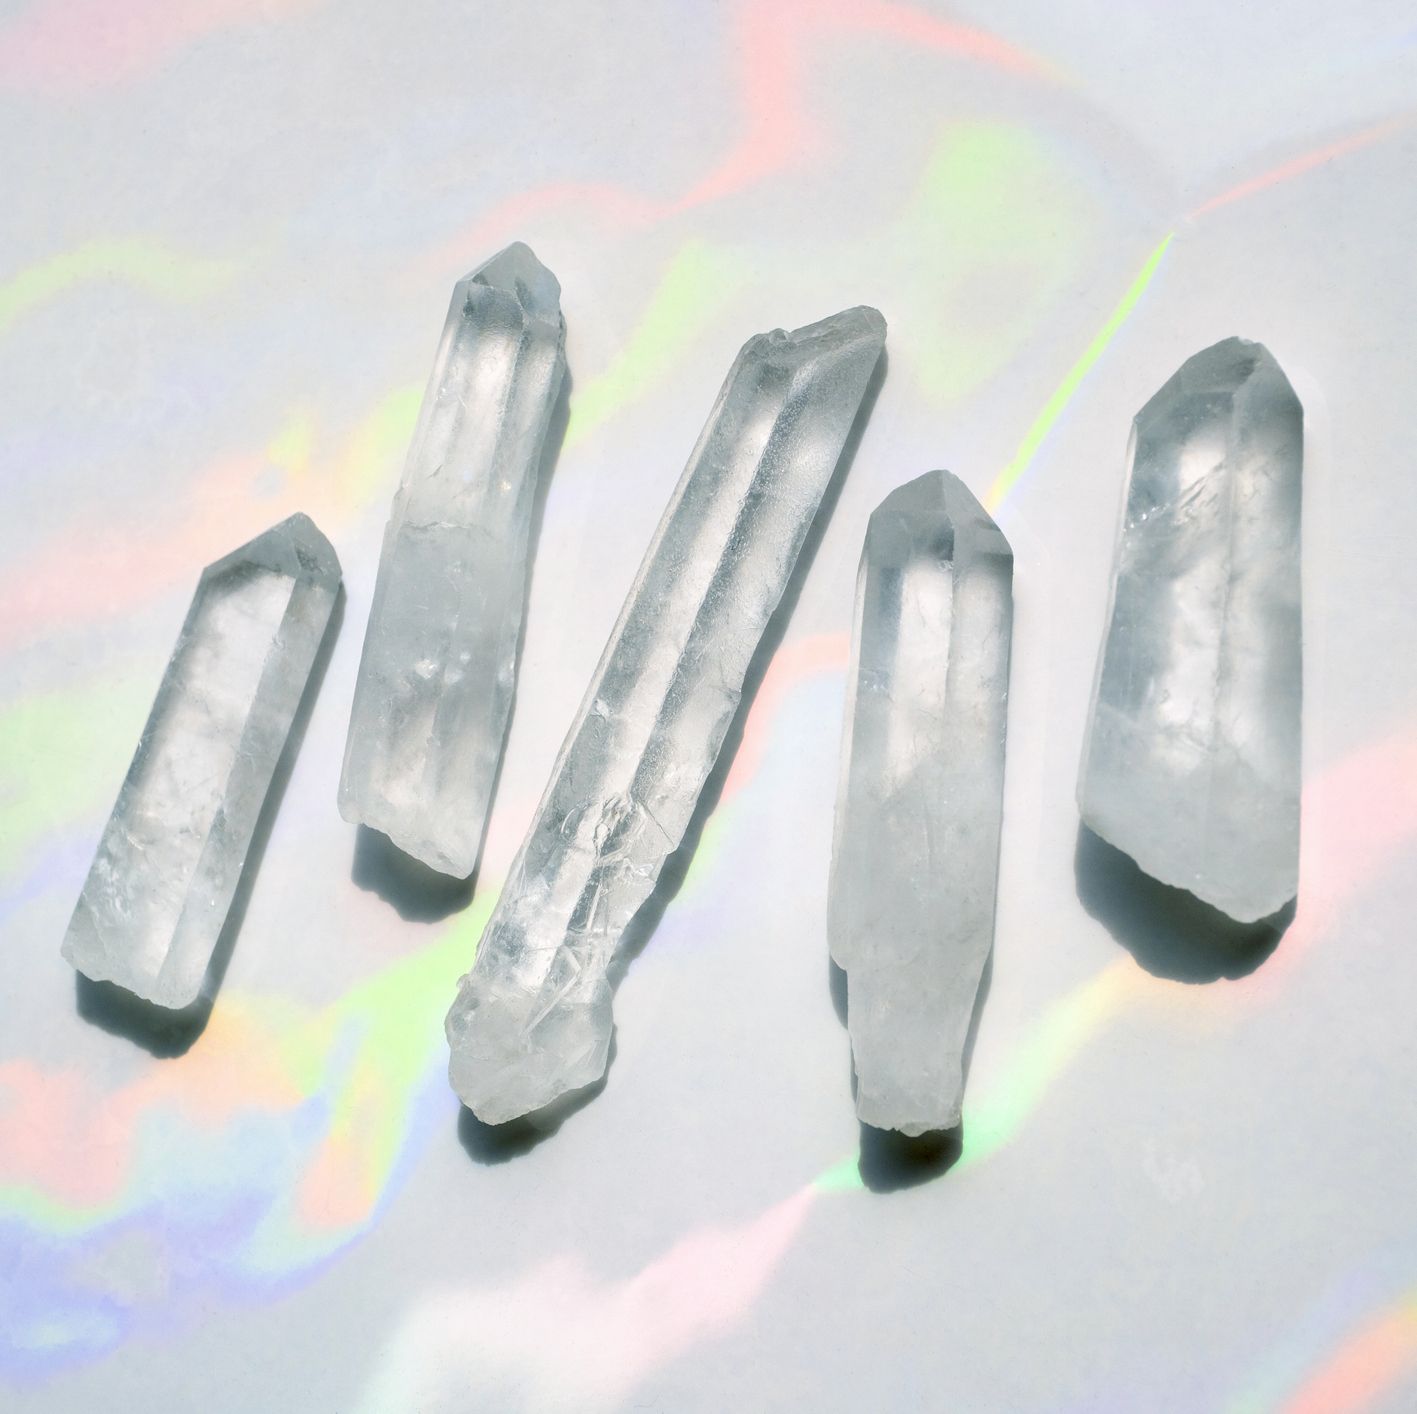 Do Crystals Really Have Magical Healing Powers? Here's What the Science Says